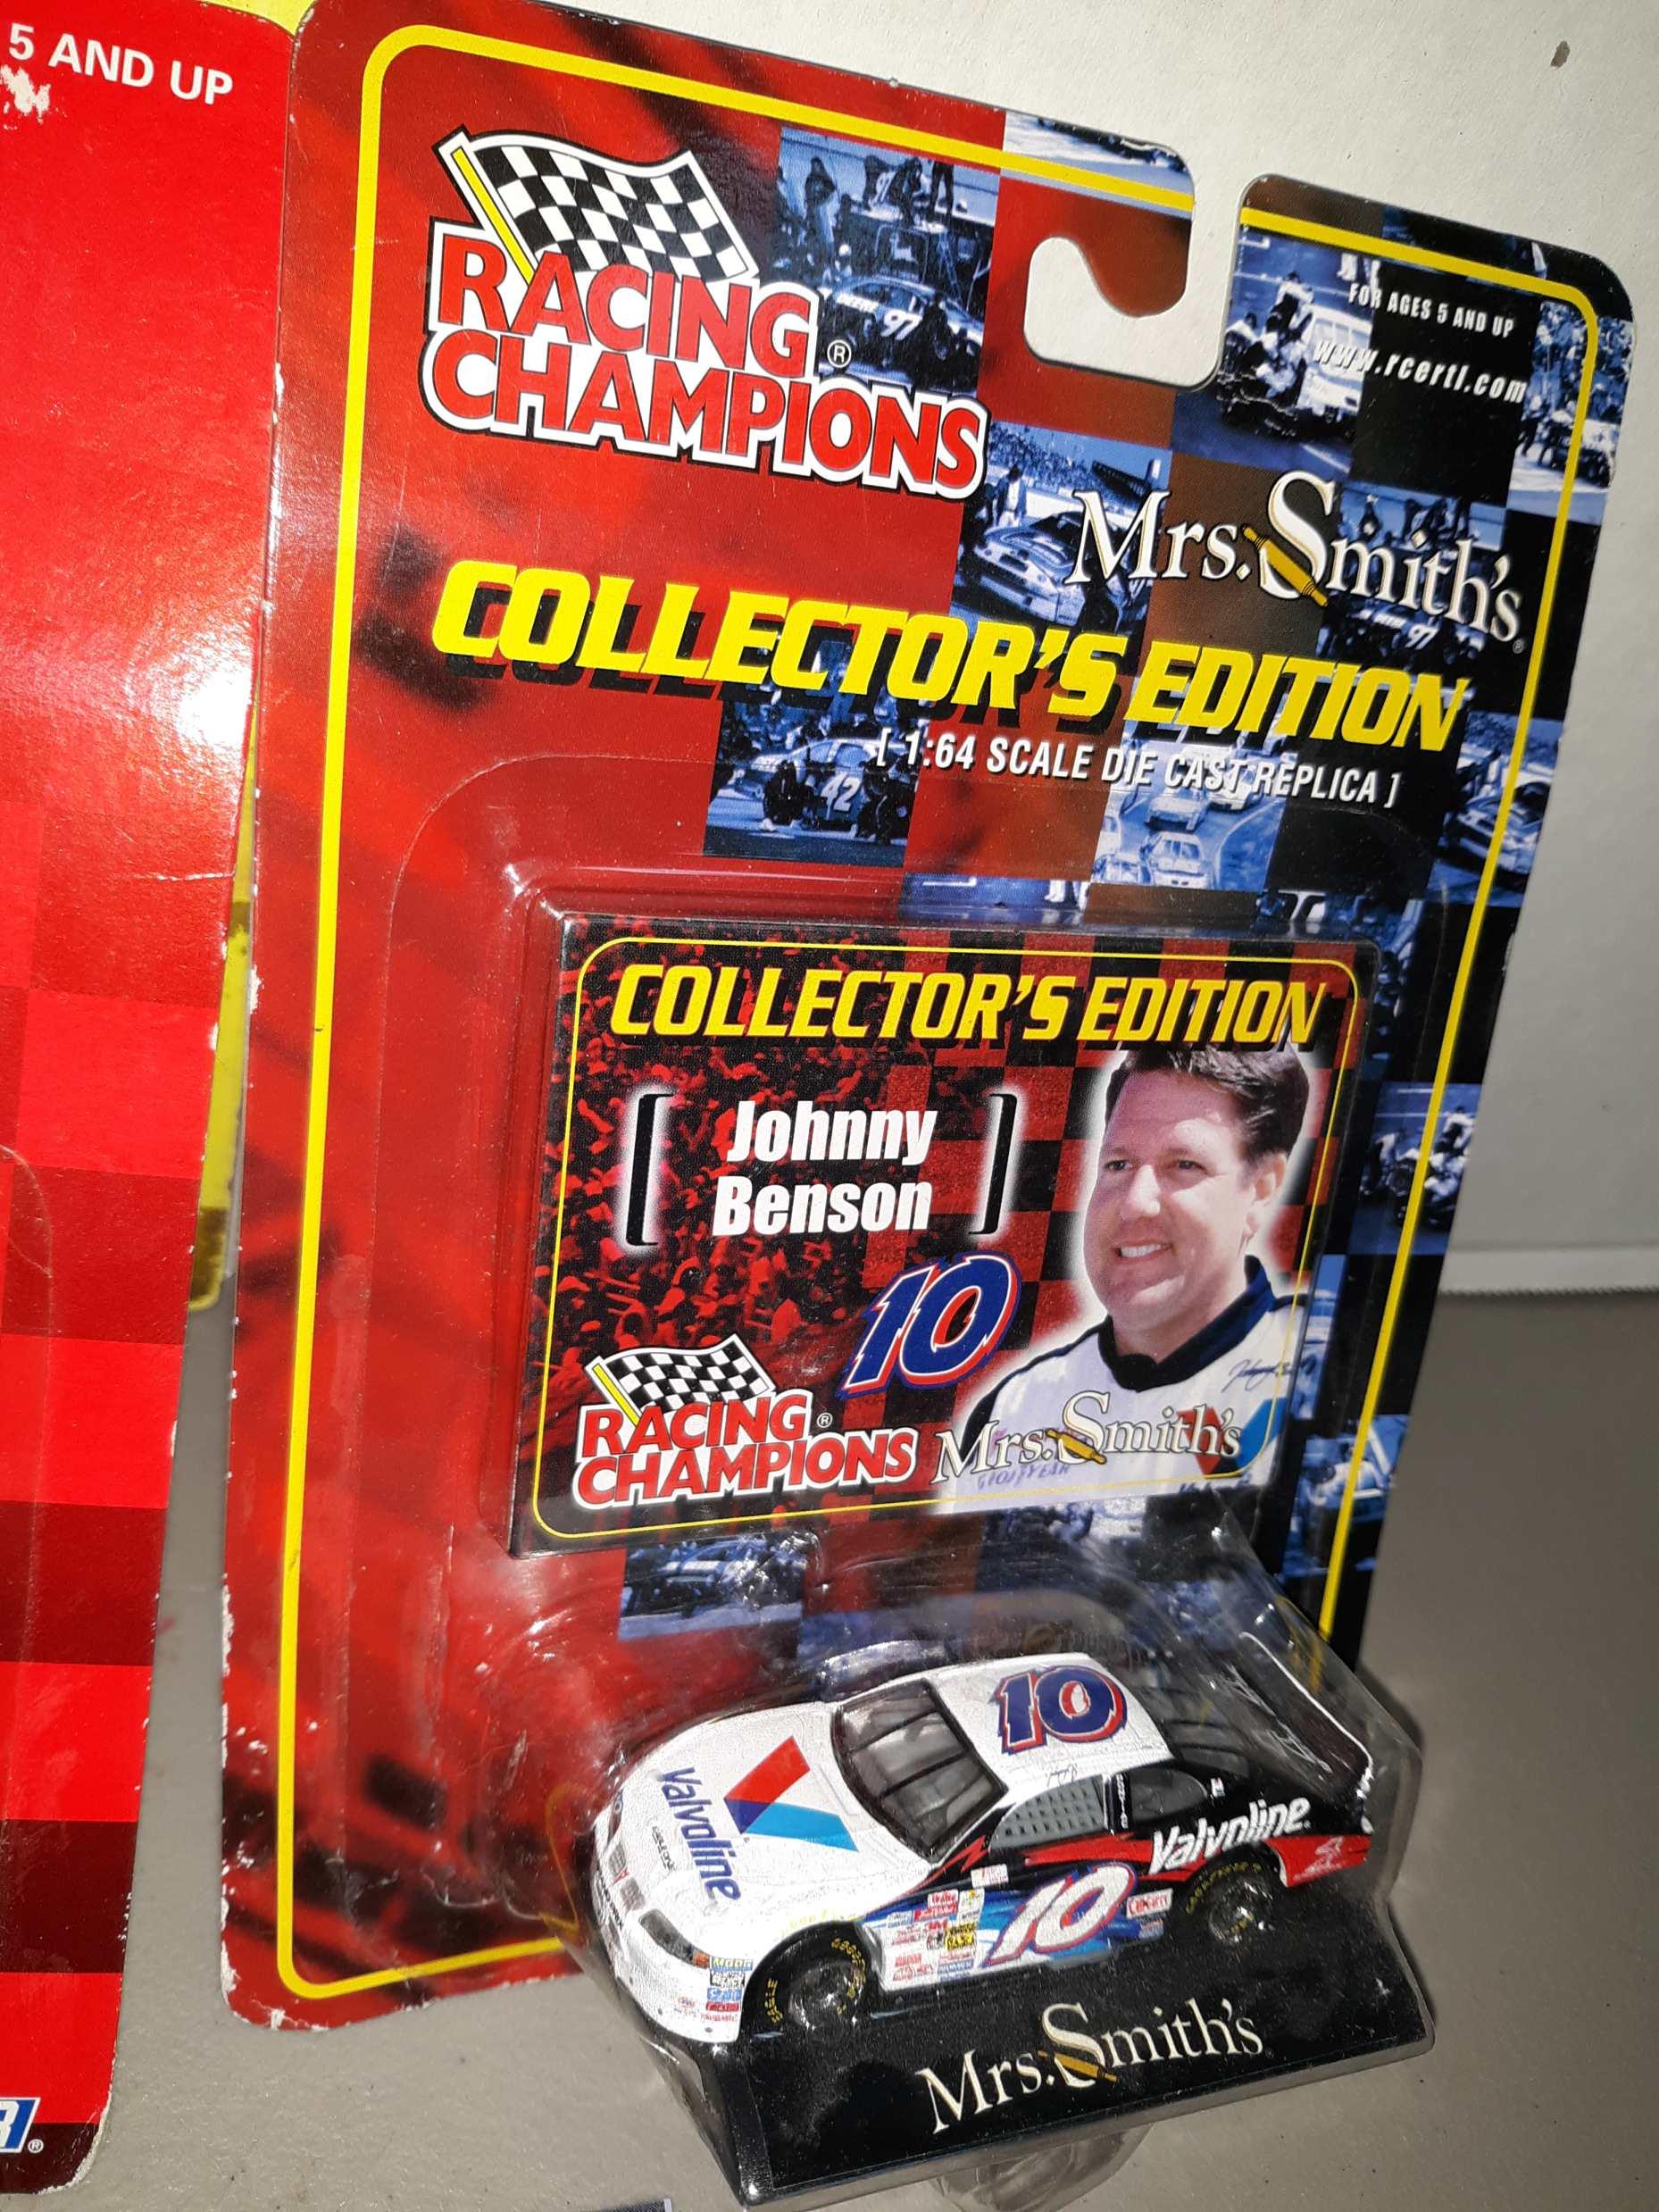 Racing Champions 50th Anniversary , Mrs. Smith's Collectors Edition, unopened